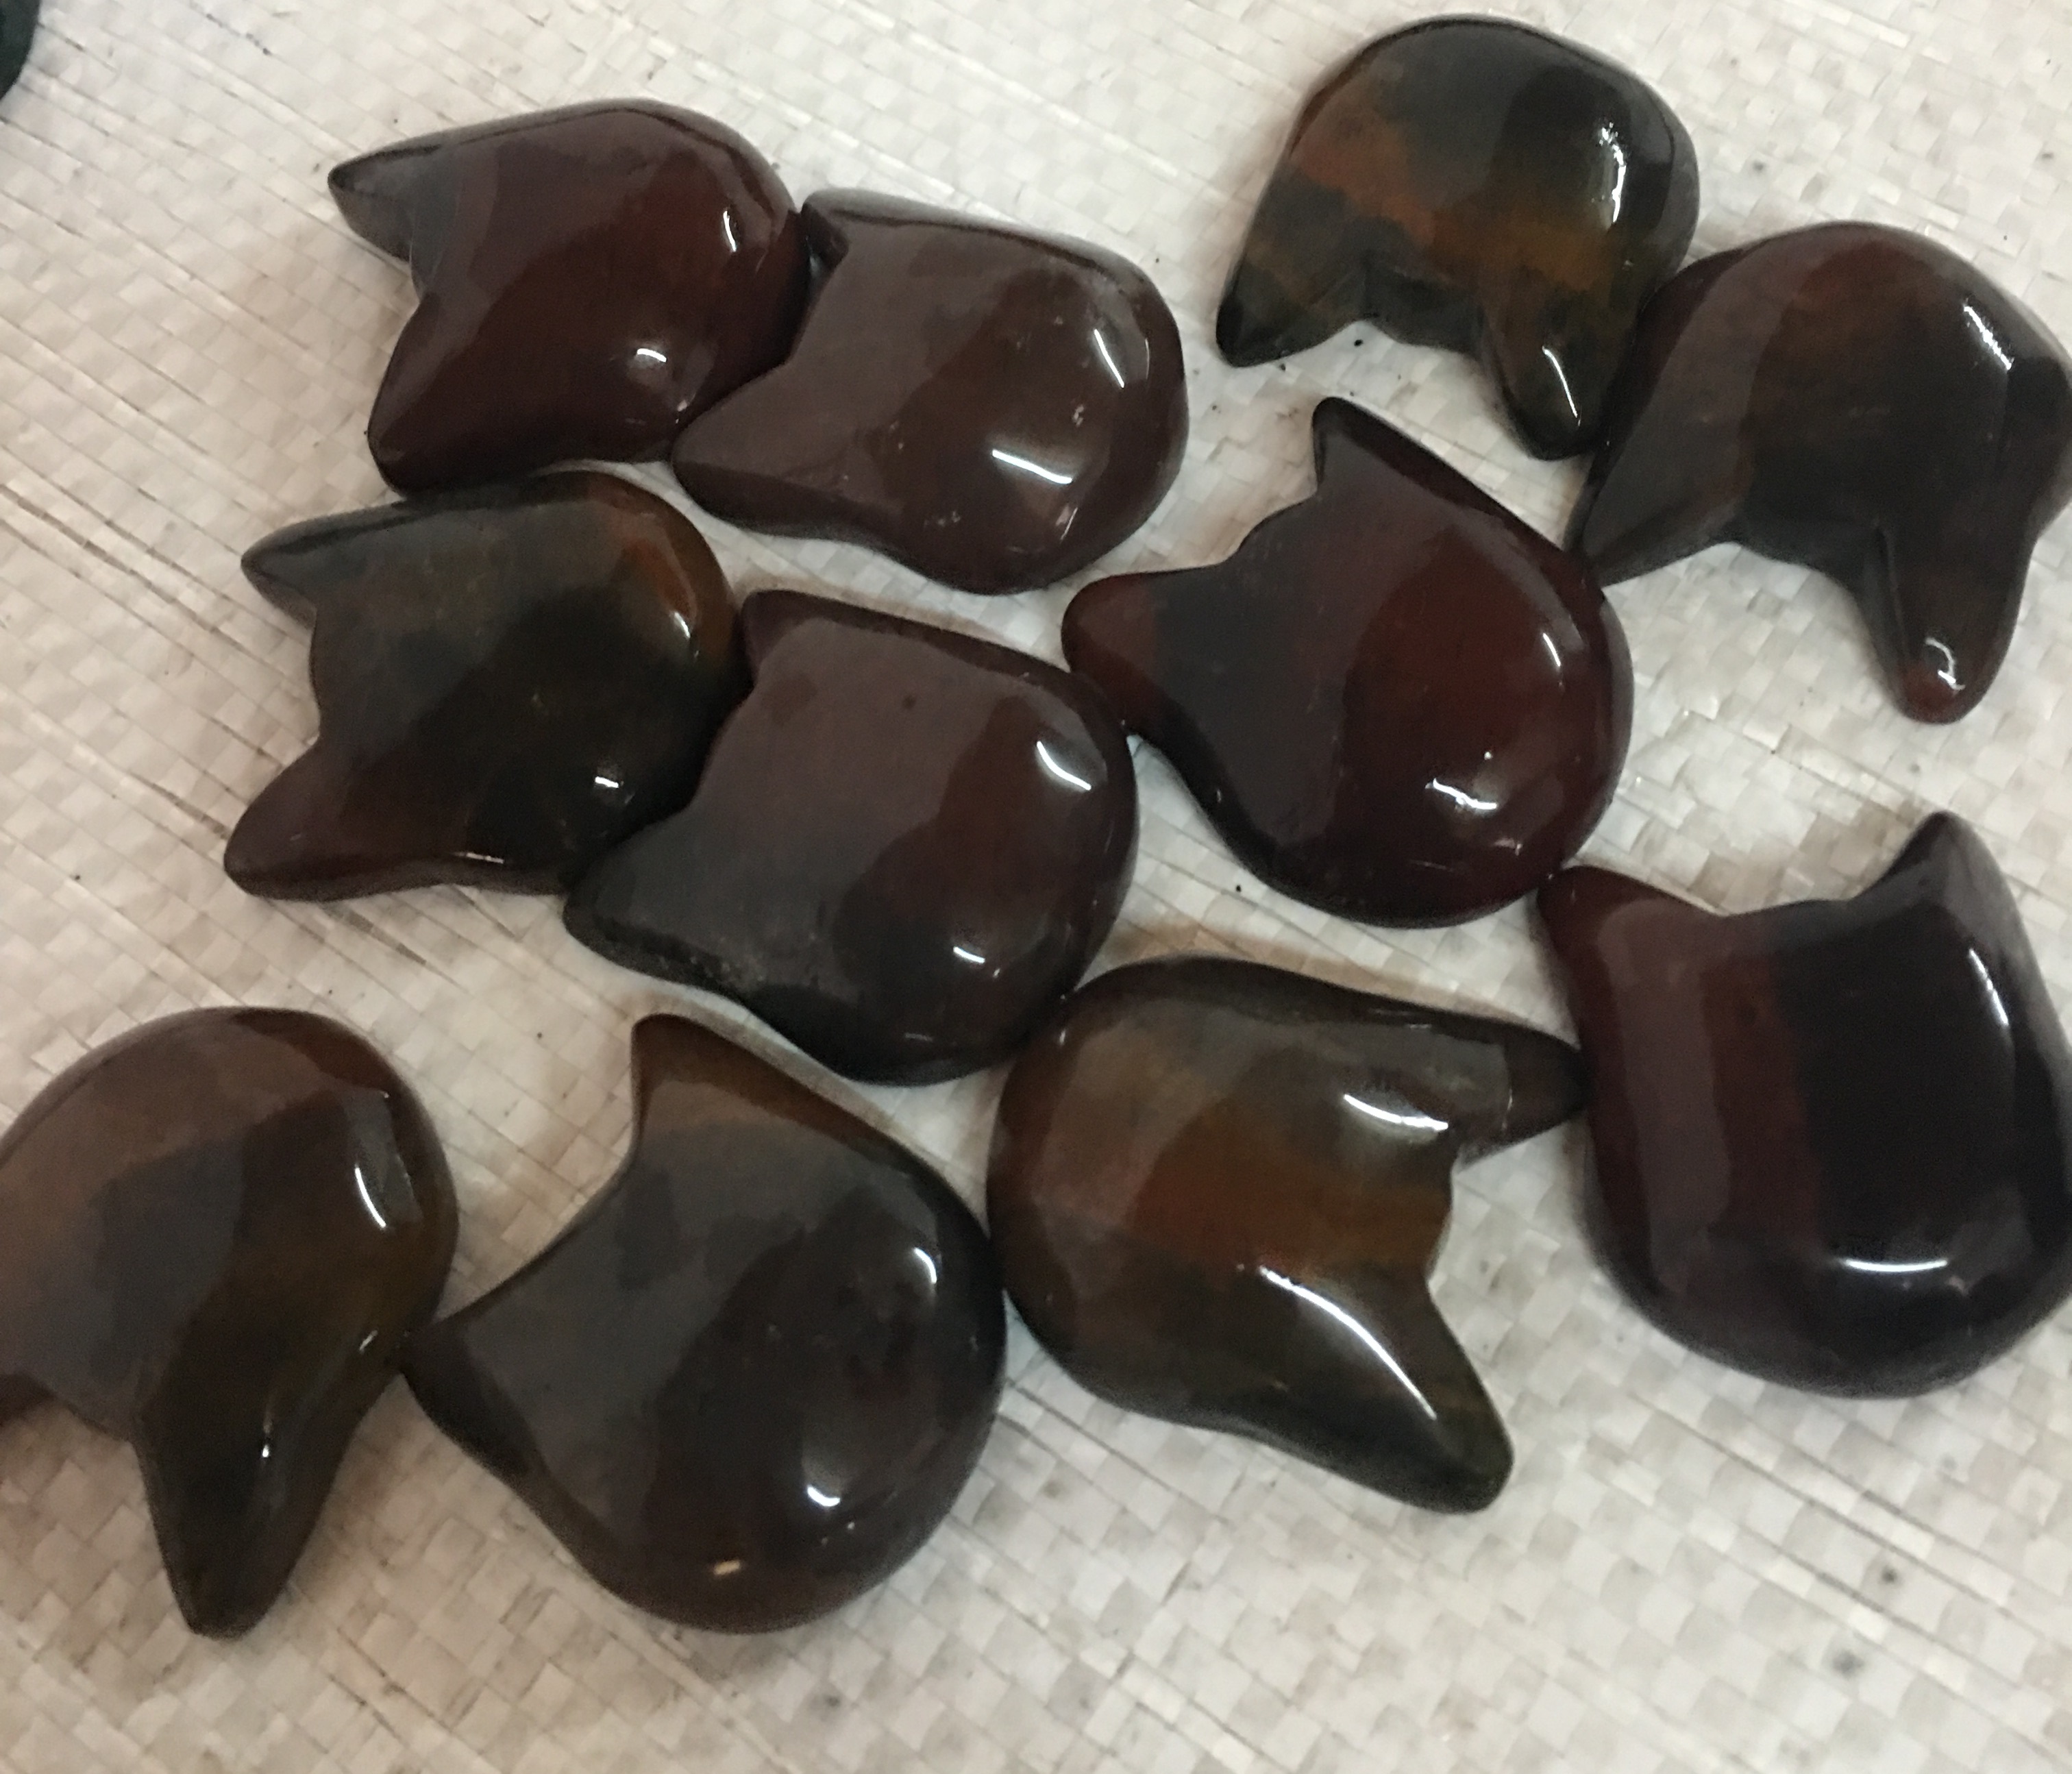 Stones from Uruguay - Pampa Red Jasper Cat Head Cabochon  - Kitty Cabochon -  Convex  Top and Flat Bottom